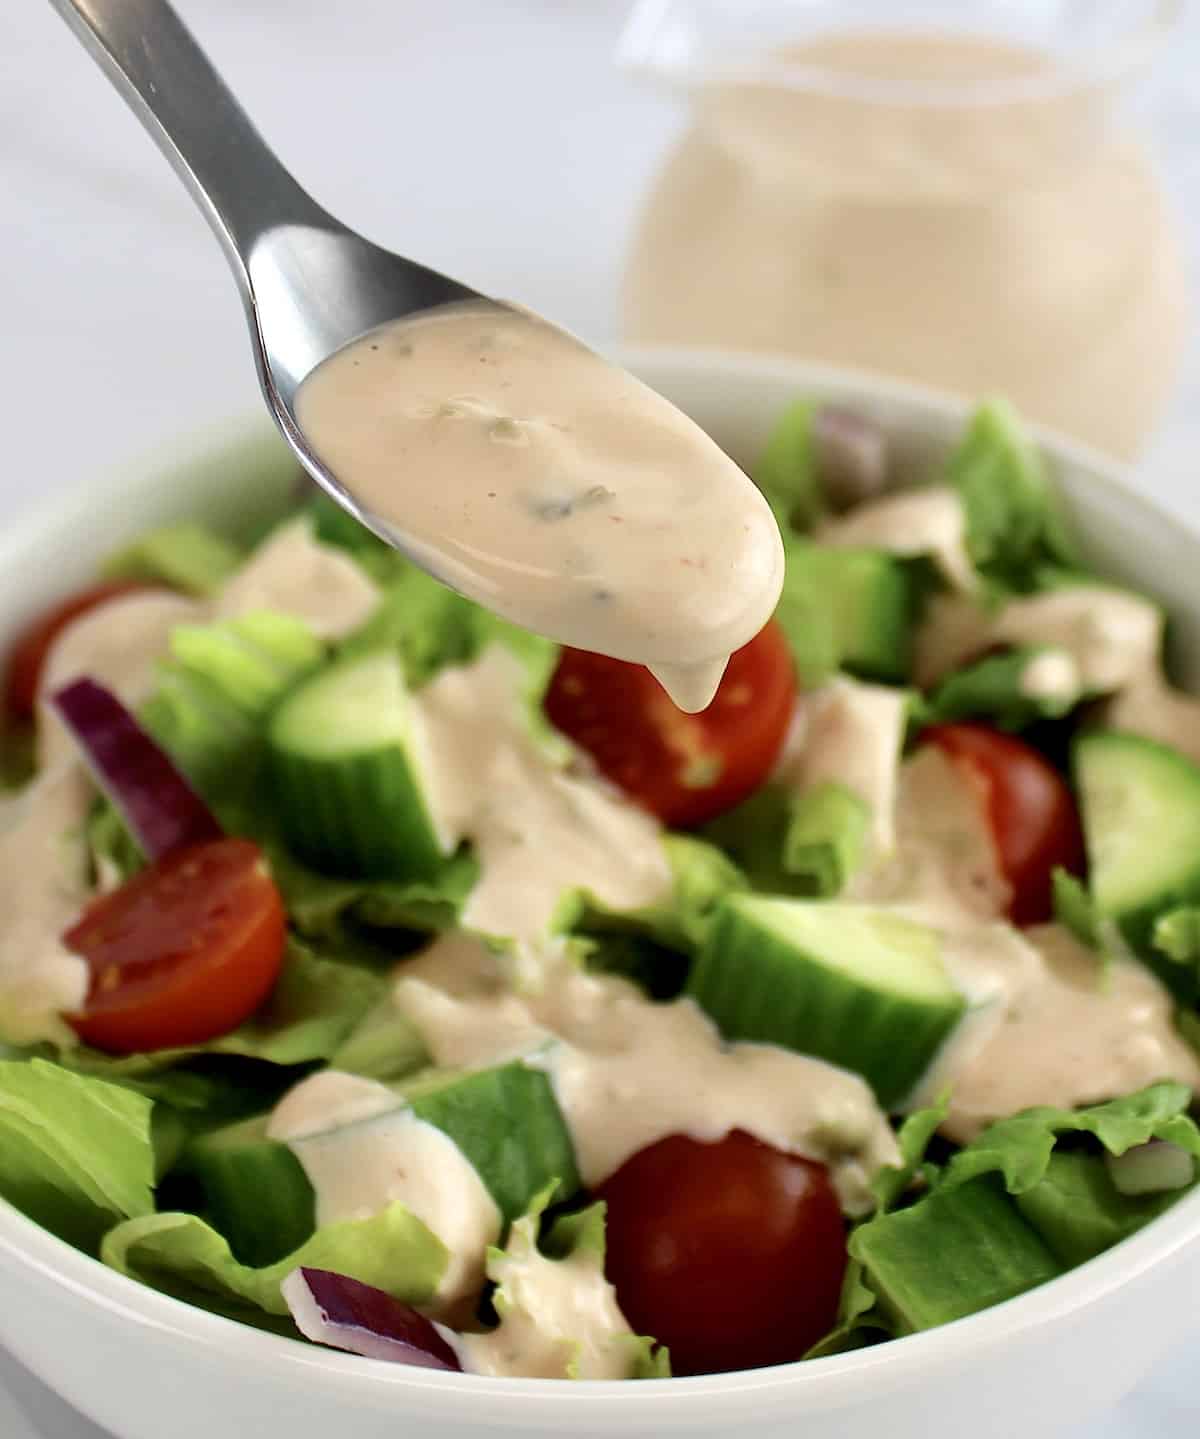 Thousand Island Dressing being spooned over salad